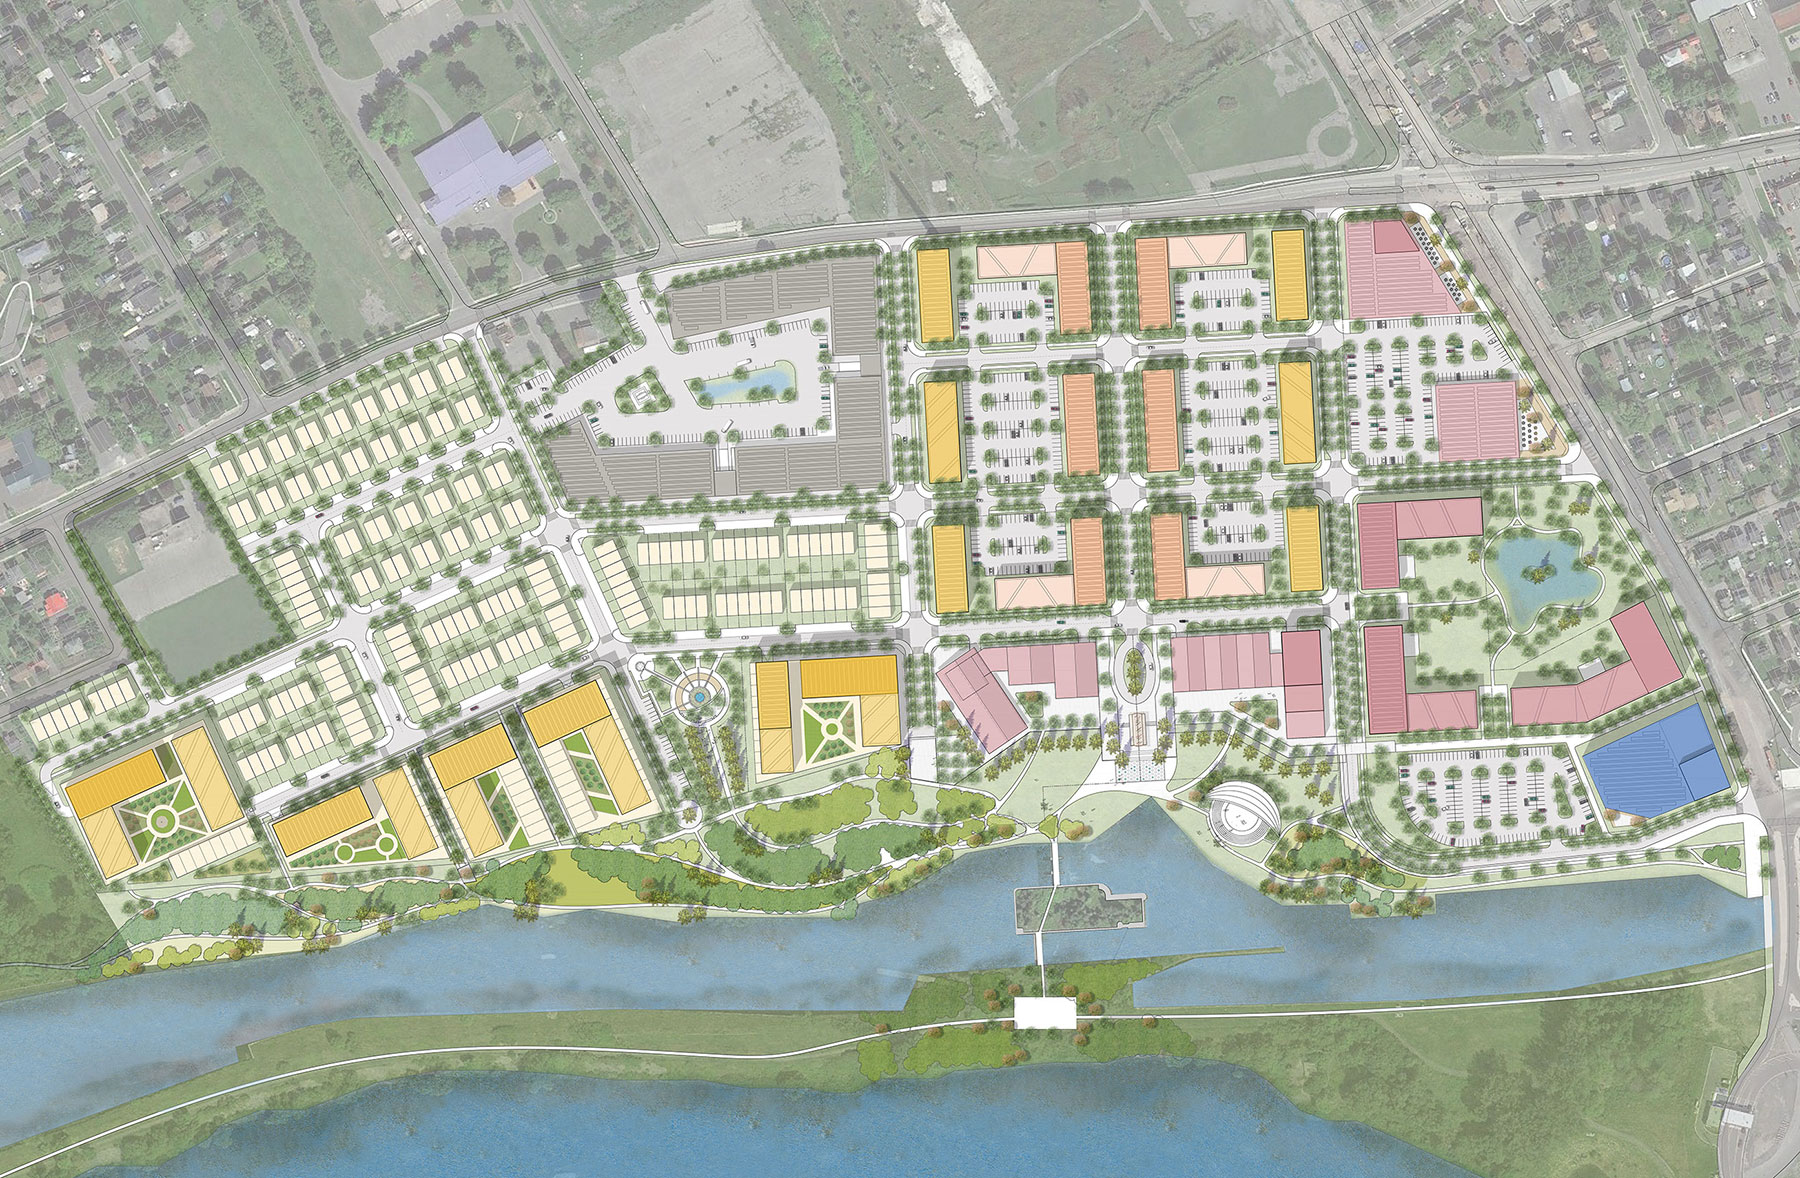 Proposed site plan of development along Cornwall Canal.